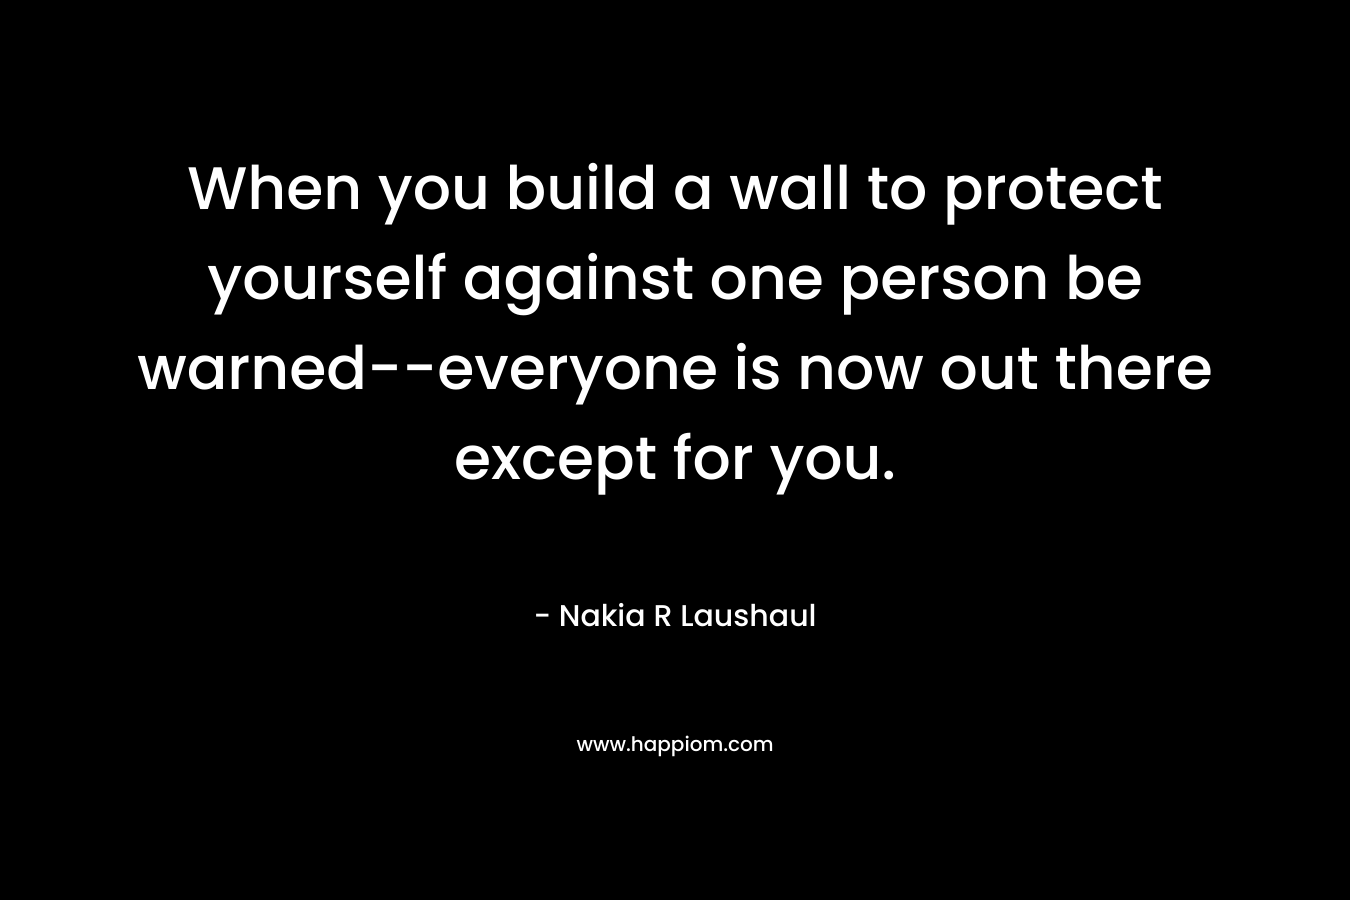 When you build a wall to protect yourself against one person be warned–everyone is now out there except for you. – Nakia R Laushaul